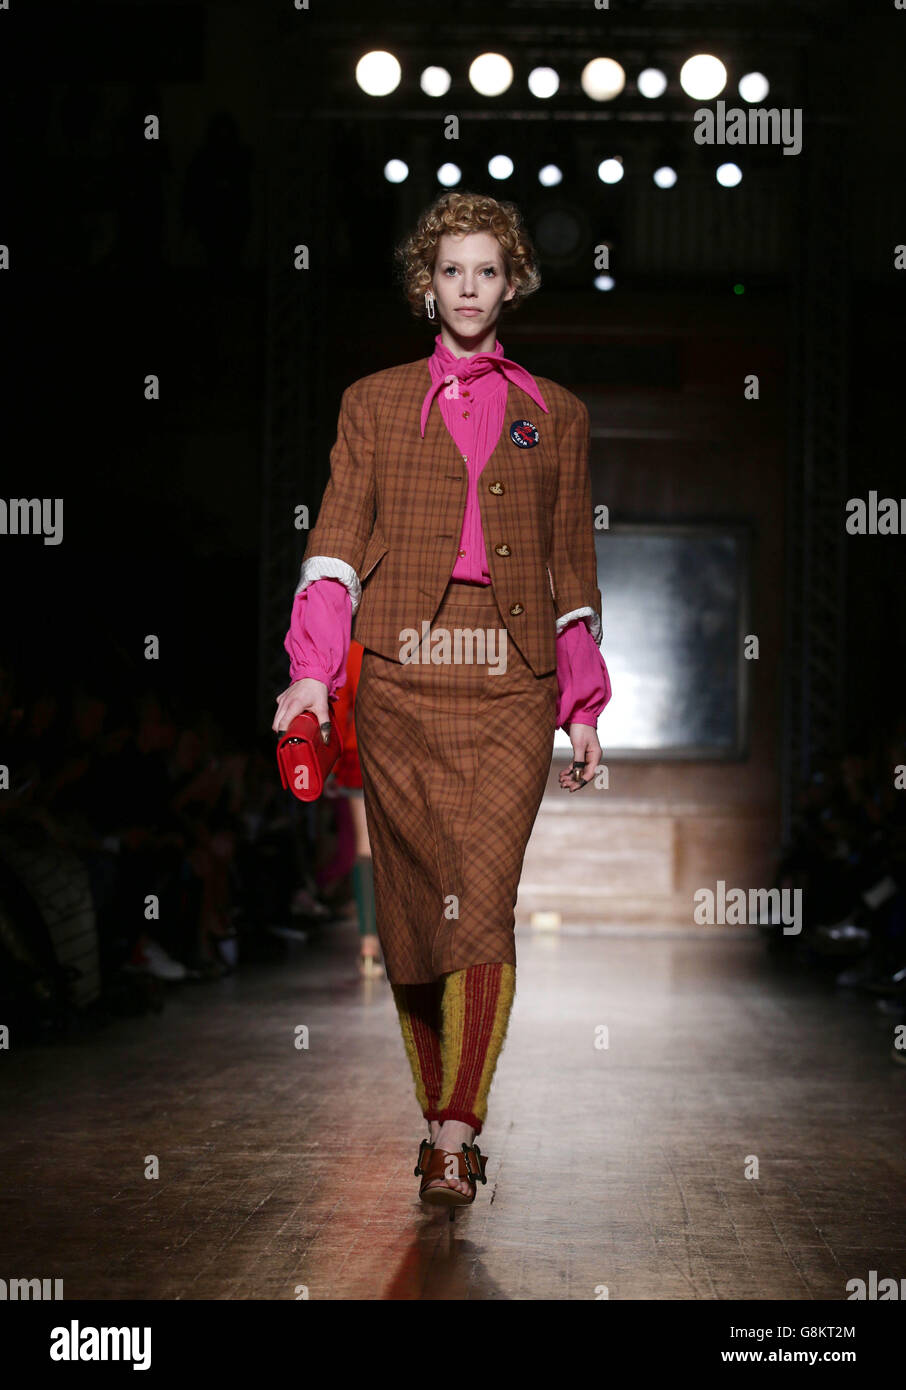 Models on the catwalk for The Vivienne Westwood Fashion Show in Paris Stock  Photo - Alamy